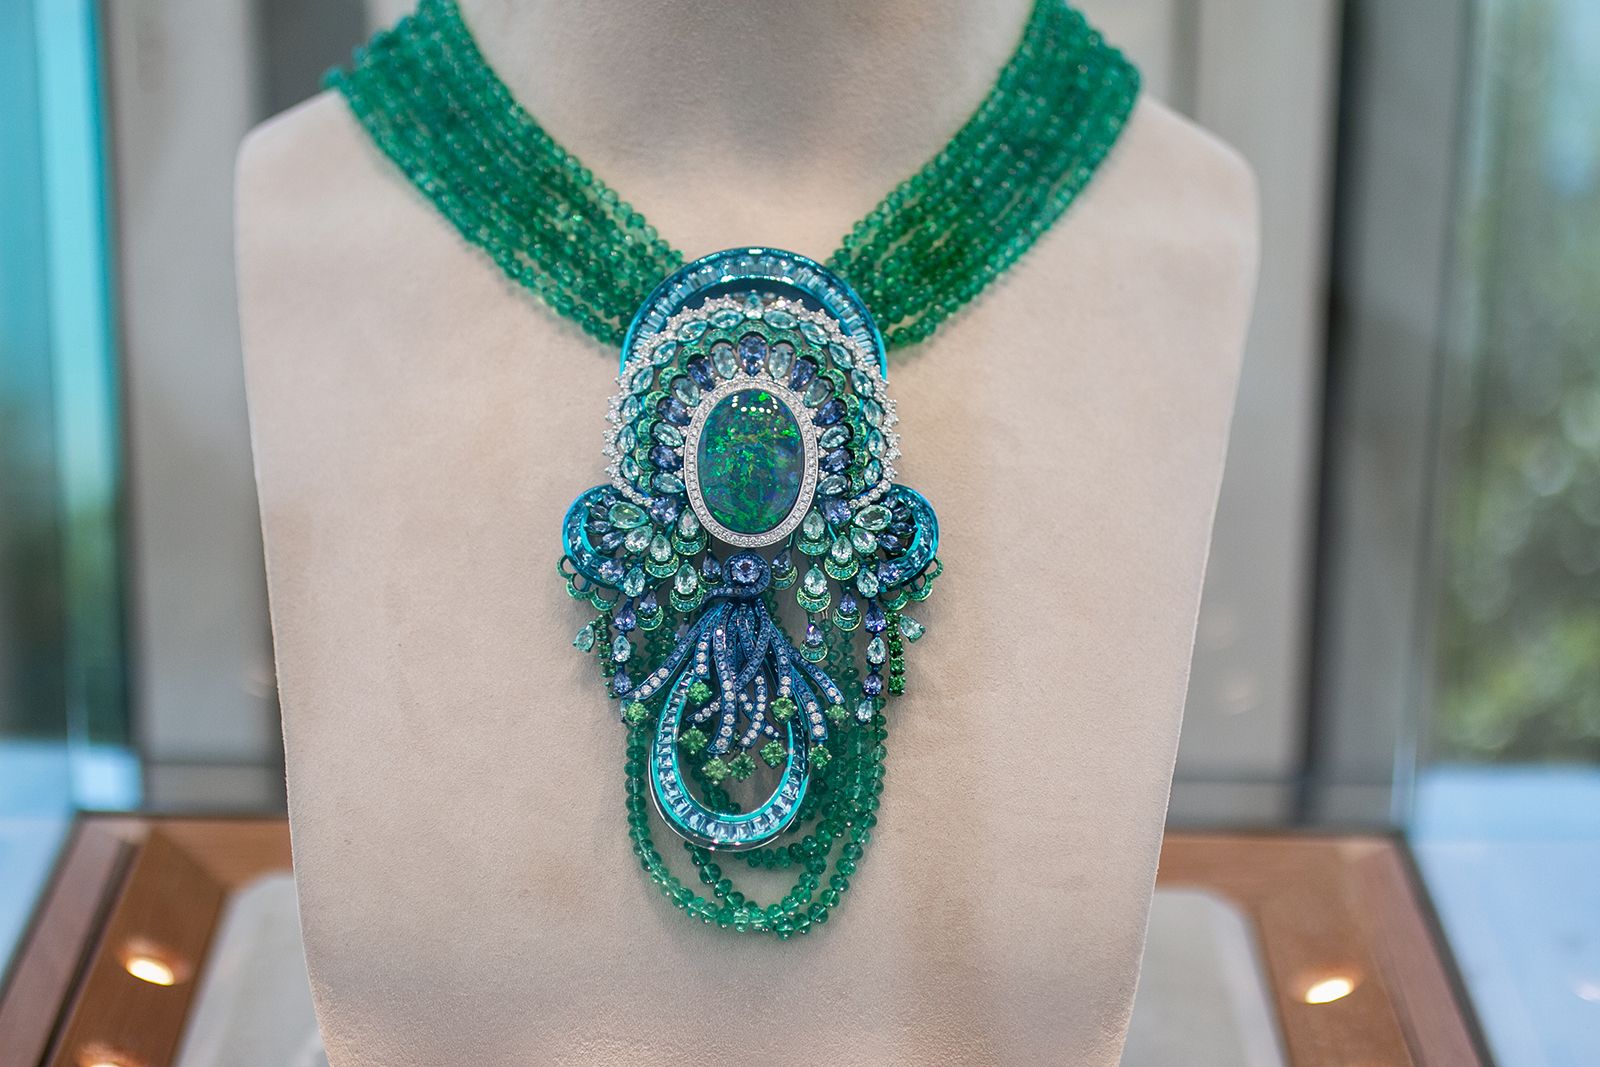 Chopard necklace from The Red Carpet collection with black opals of 23.76 carats, topaz, tourmalines, coloured sapphires, tsavorites, diamonds and emerald beads set in Fairmined-certified ethical 18k white gold and titanium